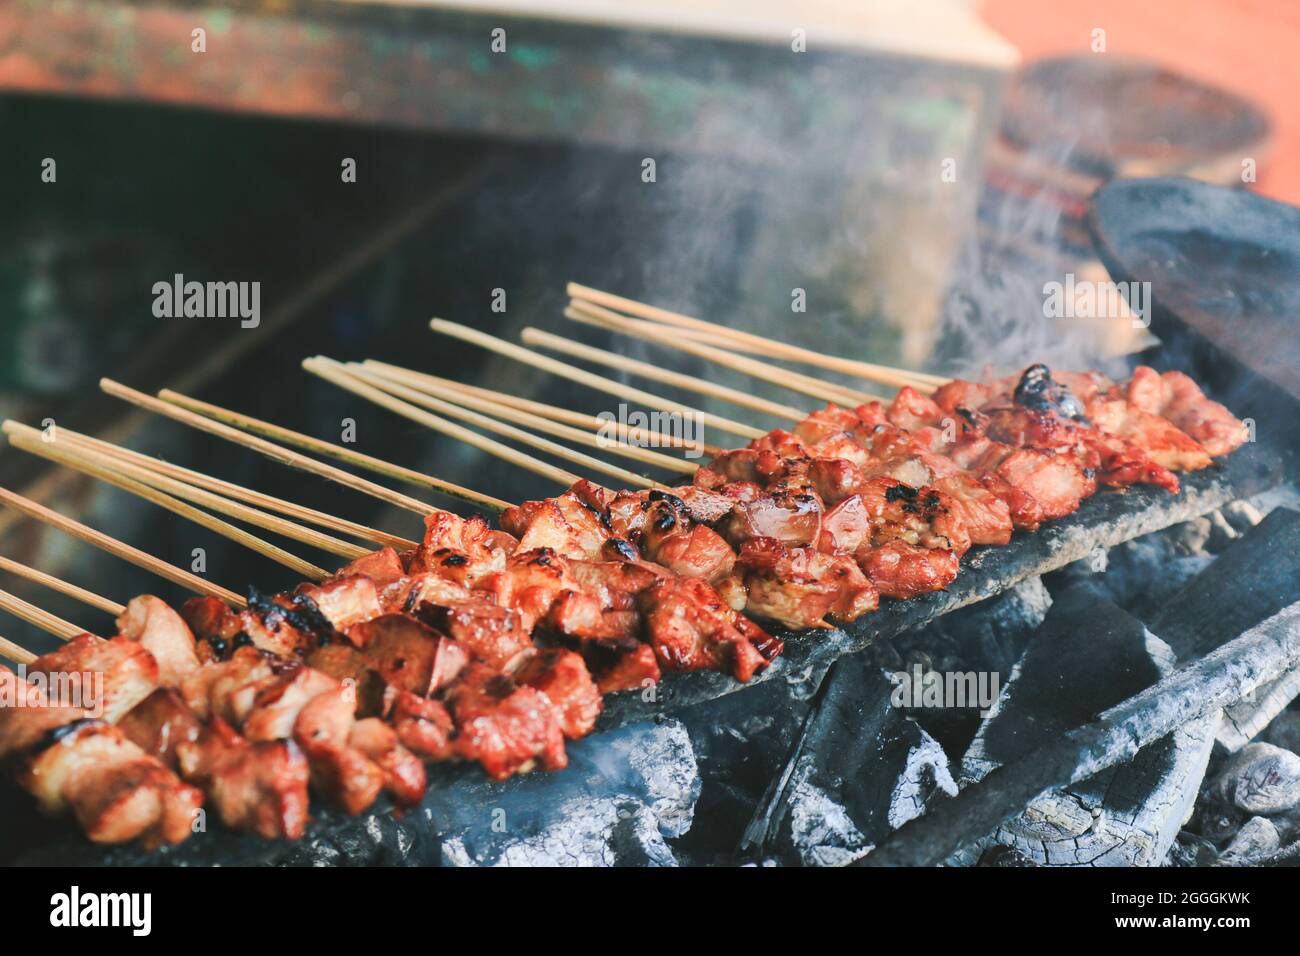 Sate Kambing or goat satay on red fire grilling by people. Stock Photo